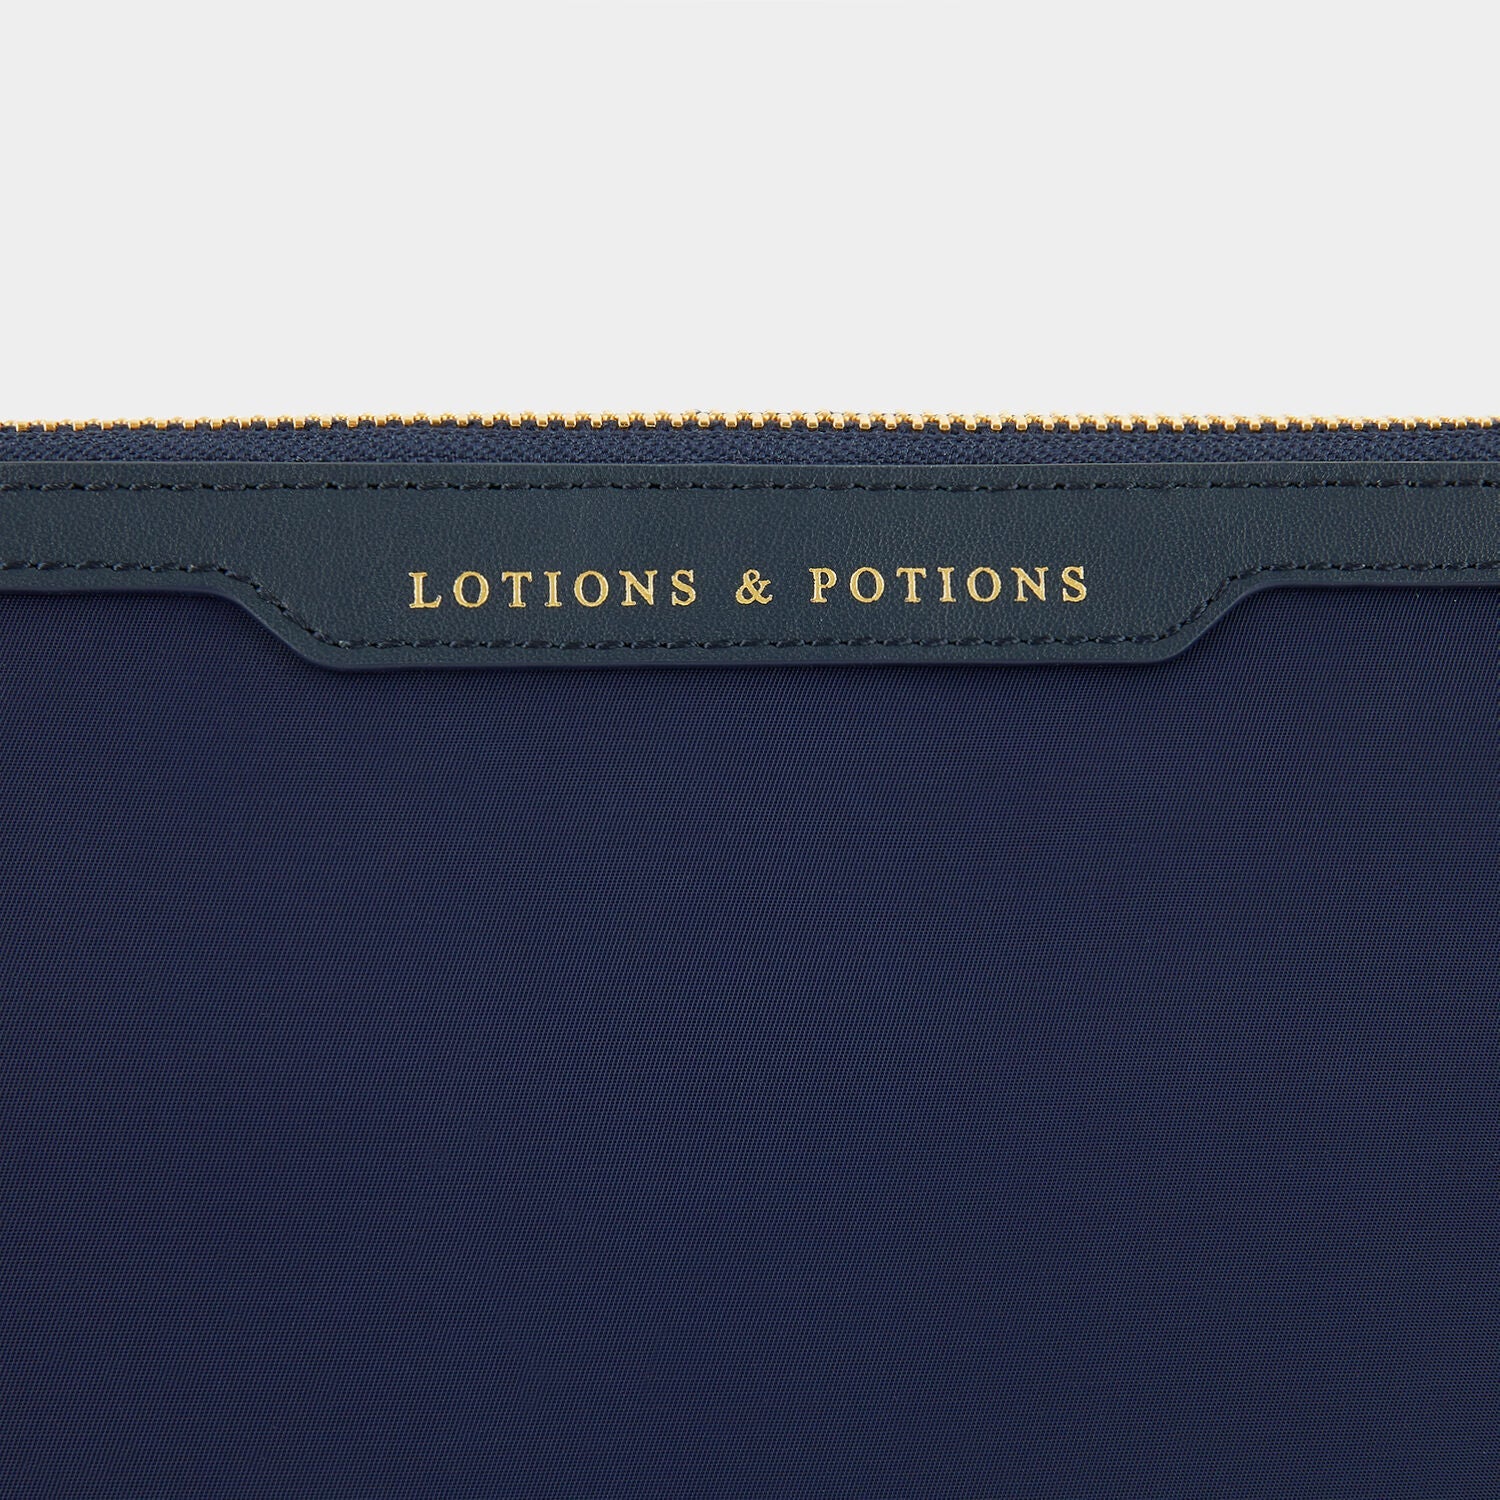 Lotions and Potions Pouch -

                  
                    ECONYL® in Dark Marine -
                  

                  Anya Hindmarch EU
